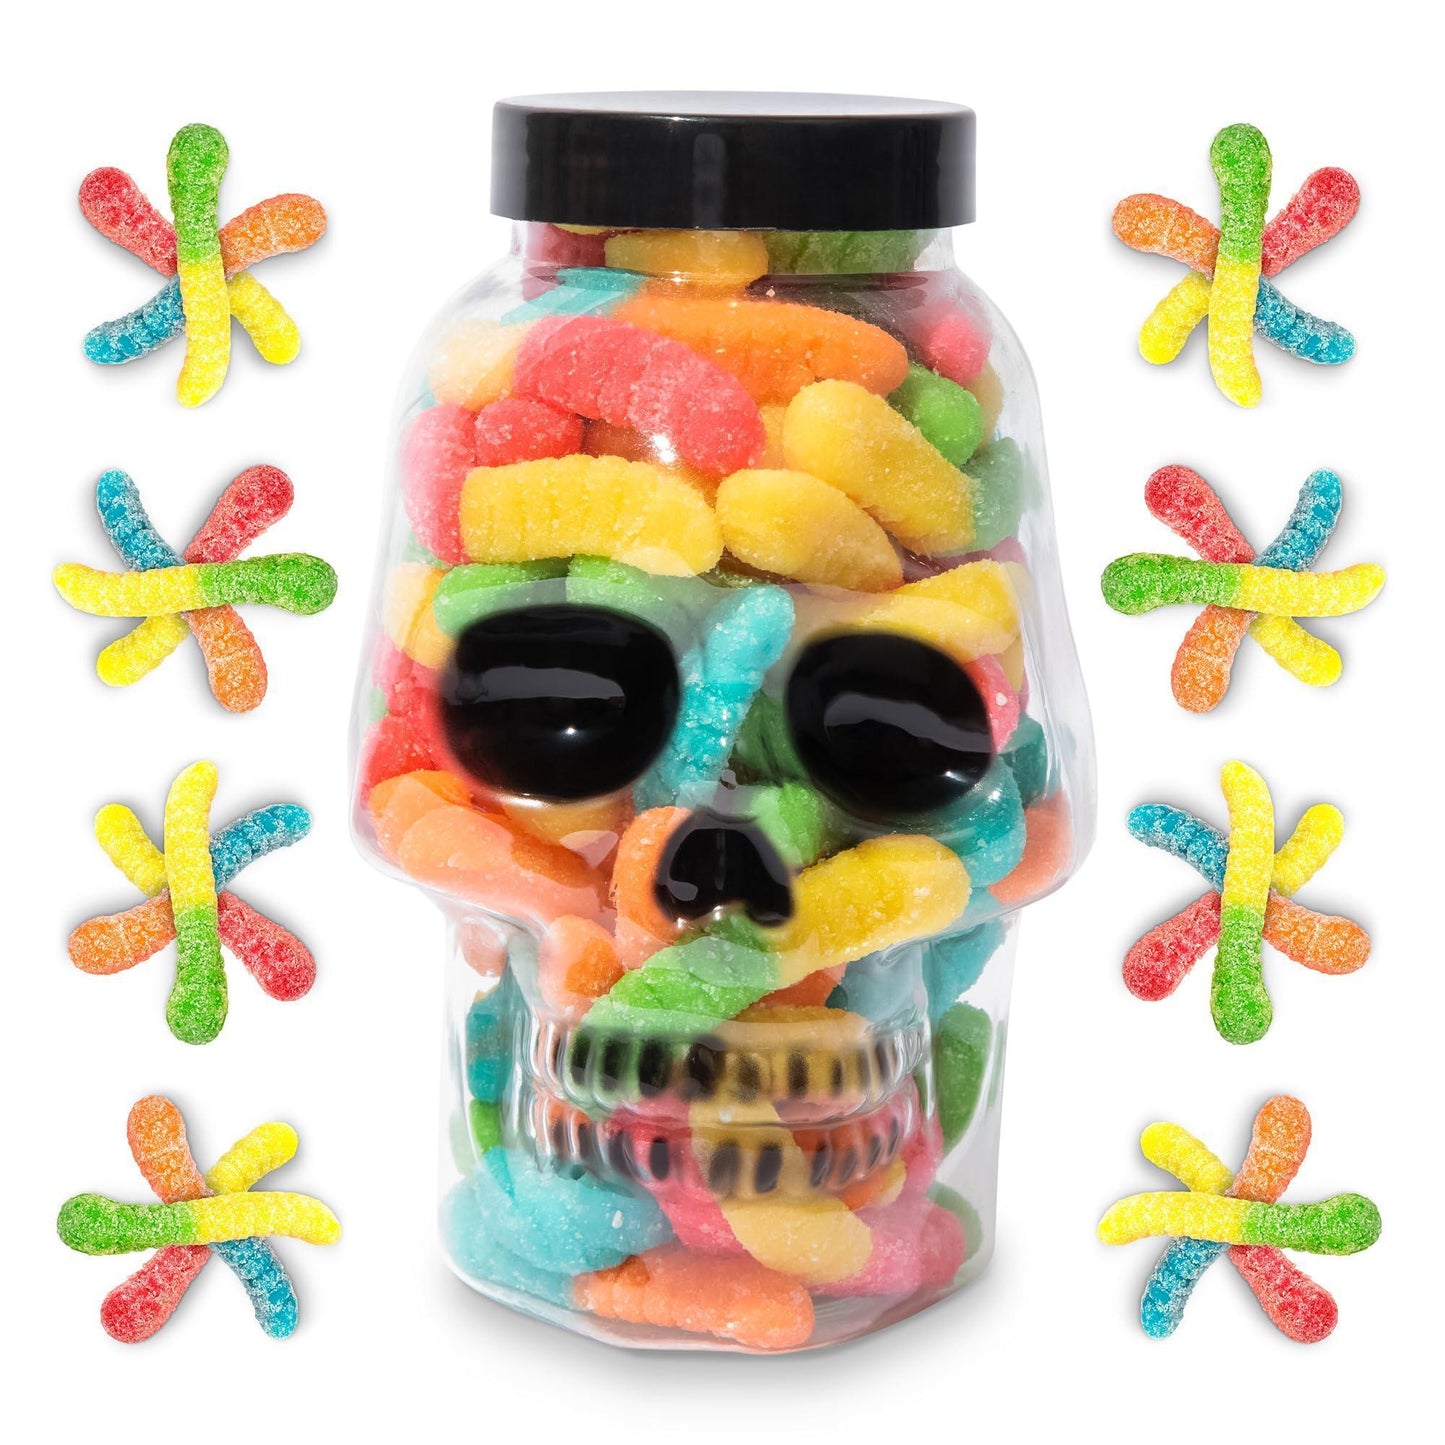 Halloween Trick or Treat Candies | Stuffed Sour Worms Gummies in Scary Skull Shape Candy Jar | Spooky Sweets | Perfect For Halloween - Loomini